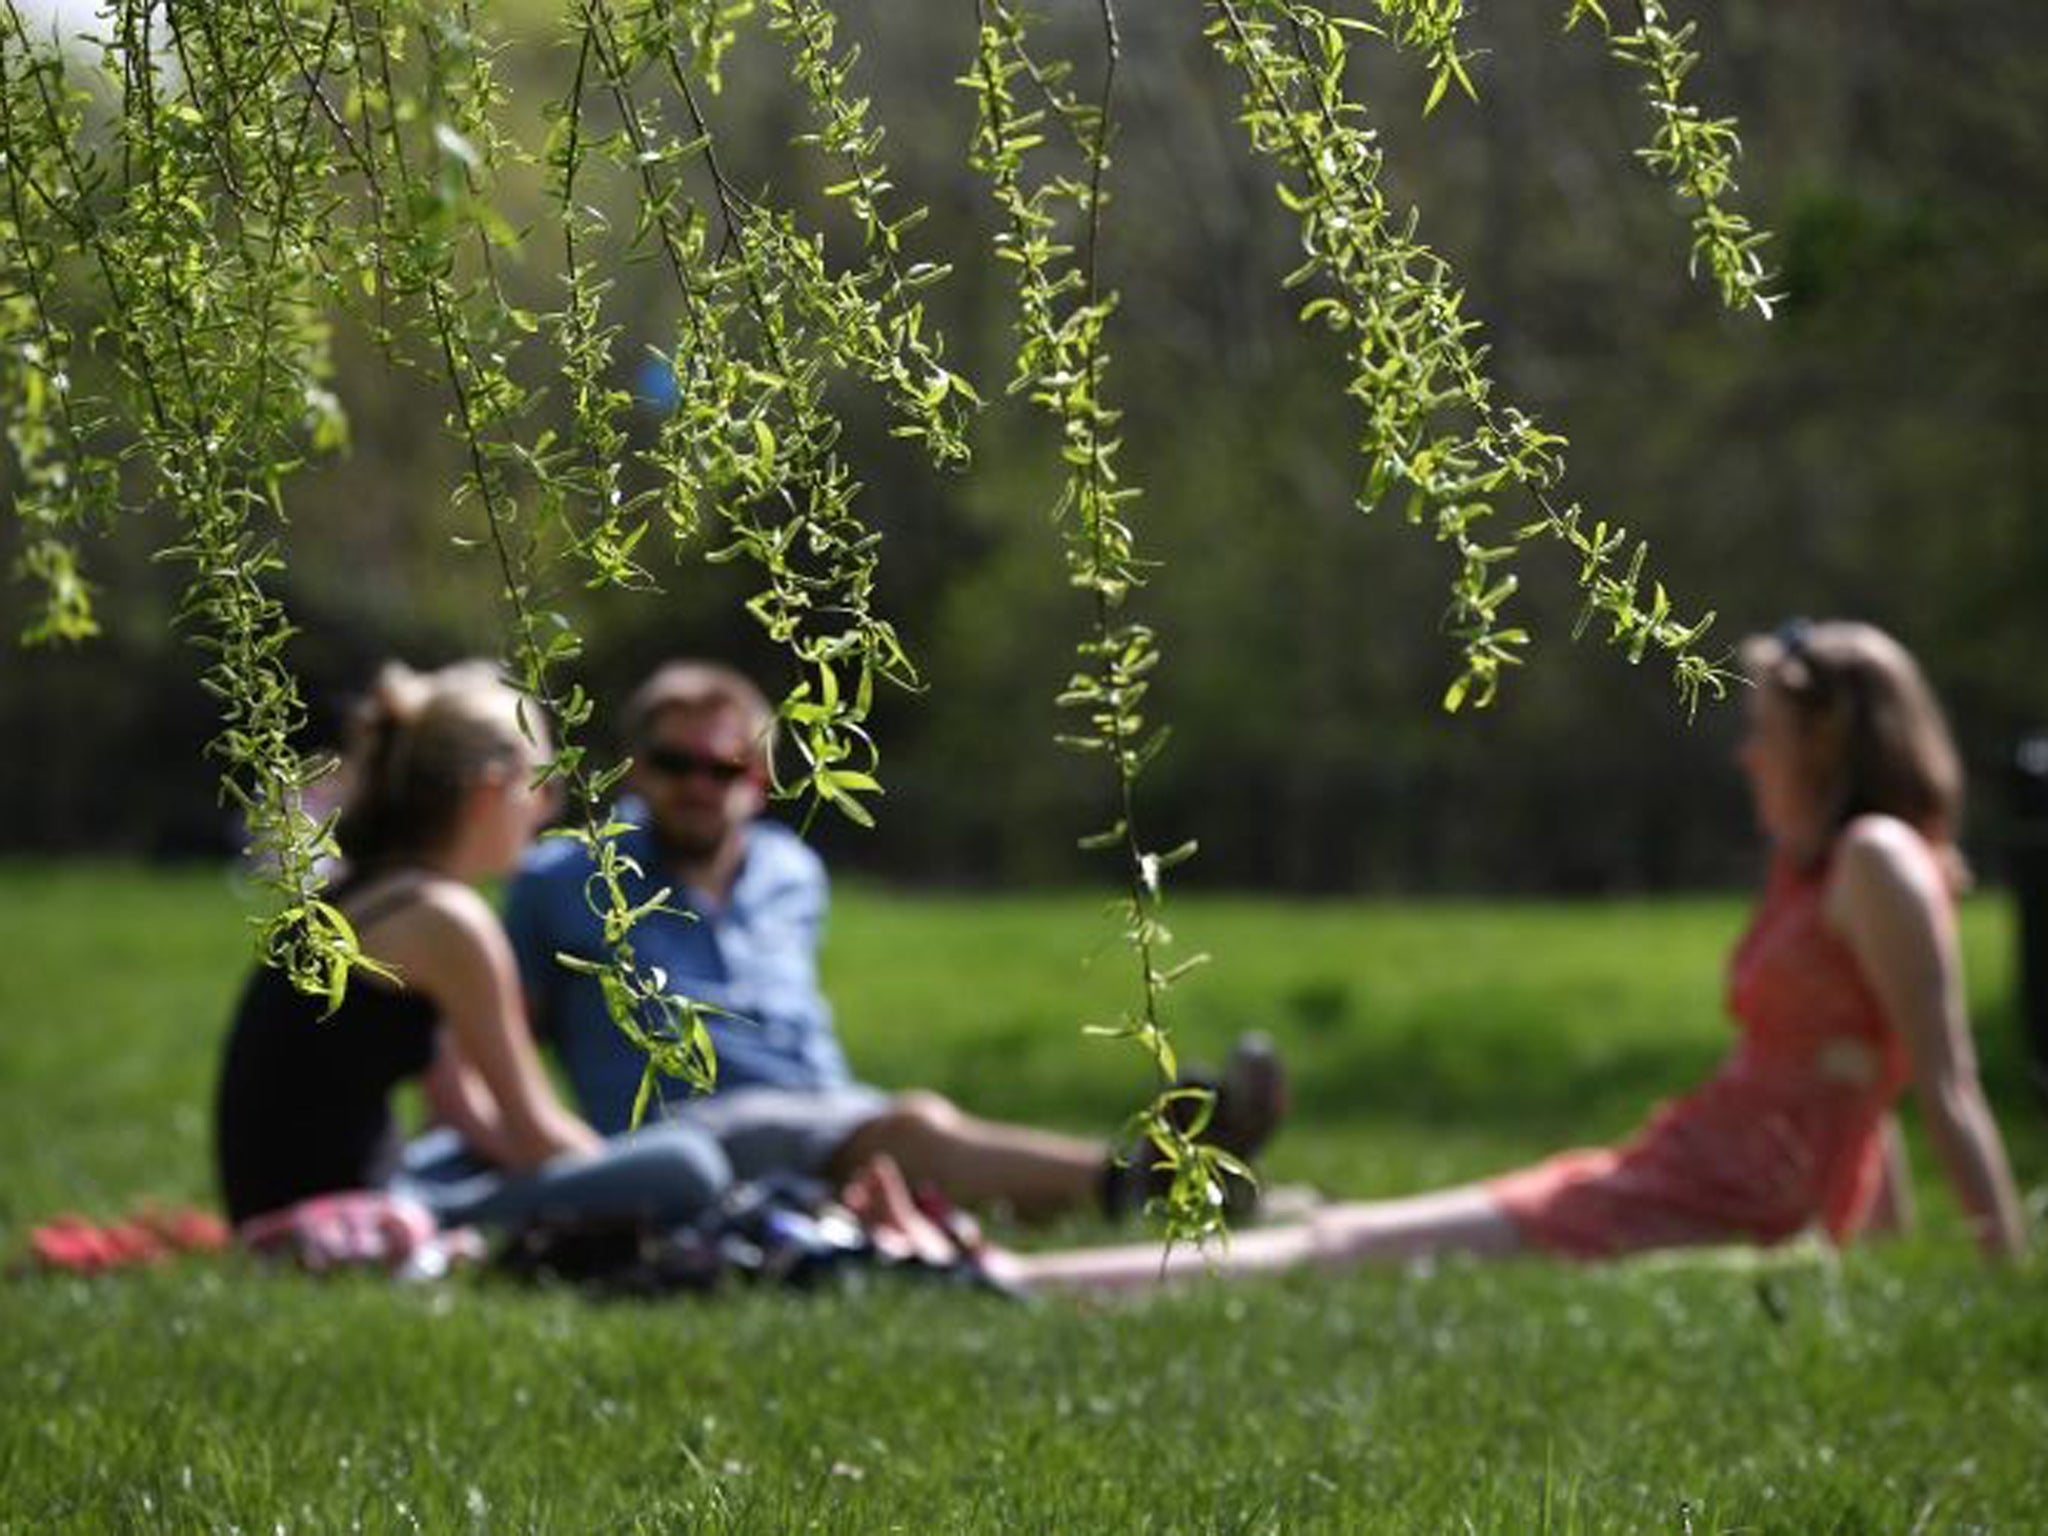 People enjoy a picnic on Wednesday in warmer weather in Regent's Park, London